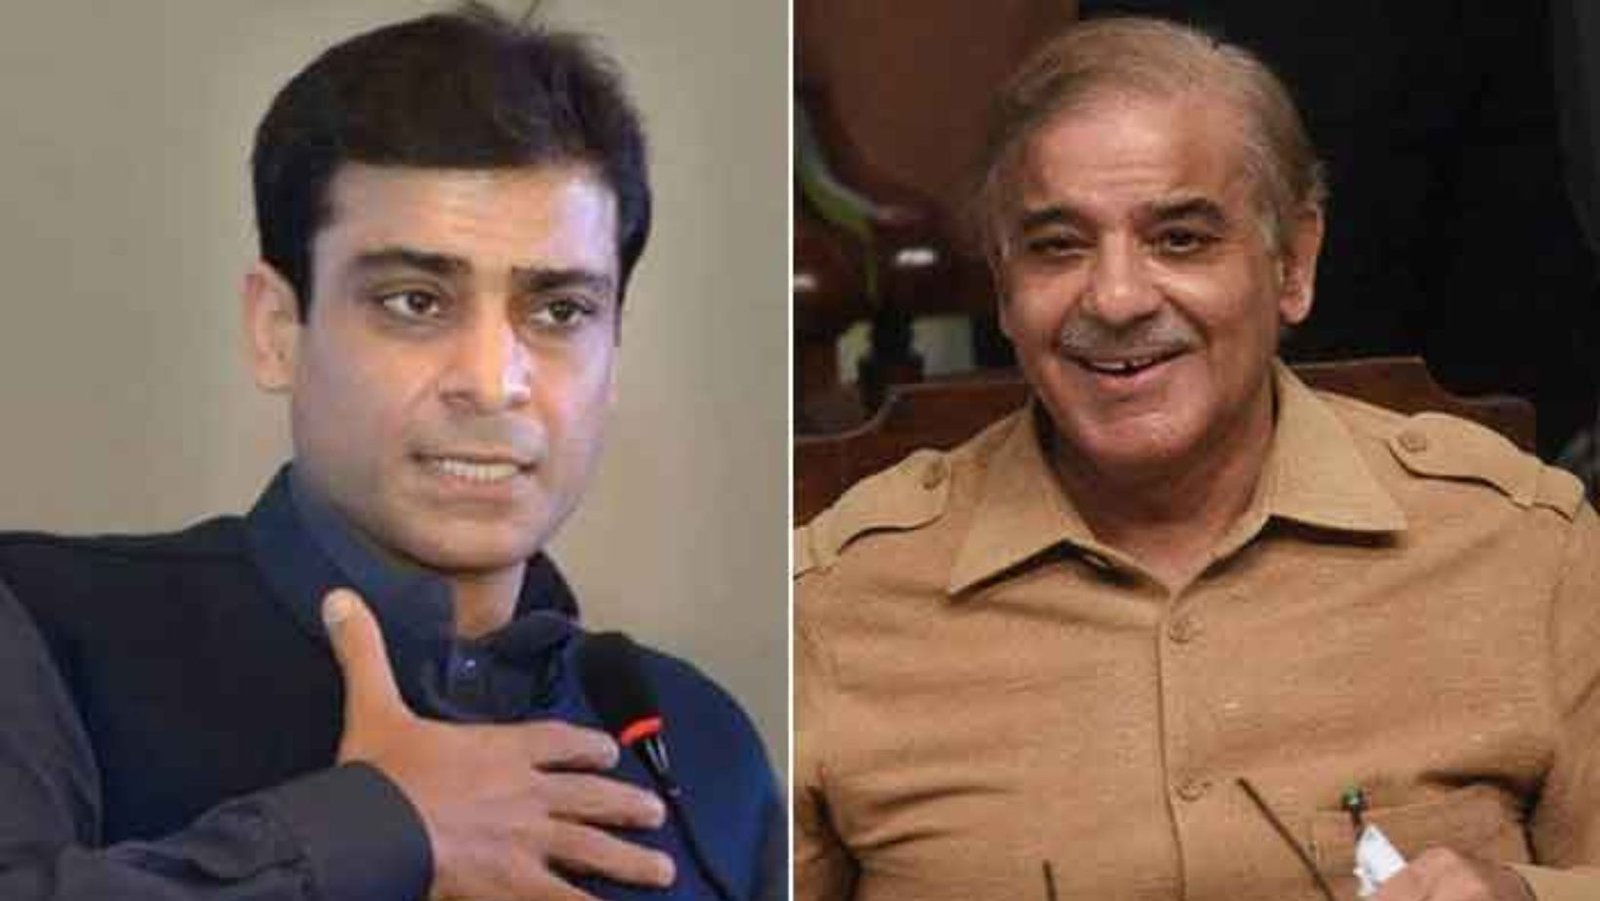 PM Shehbaz and Hamza are summoned by the court on September 7 for an alleged money laundering case